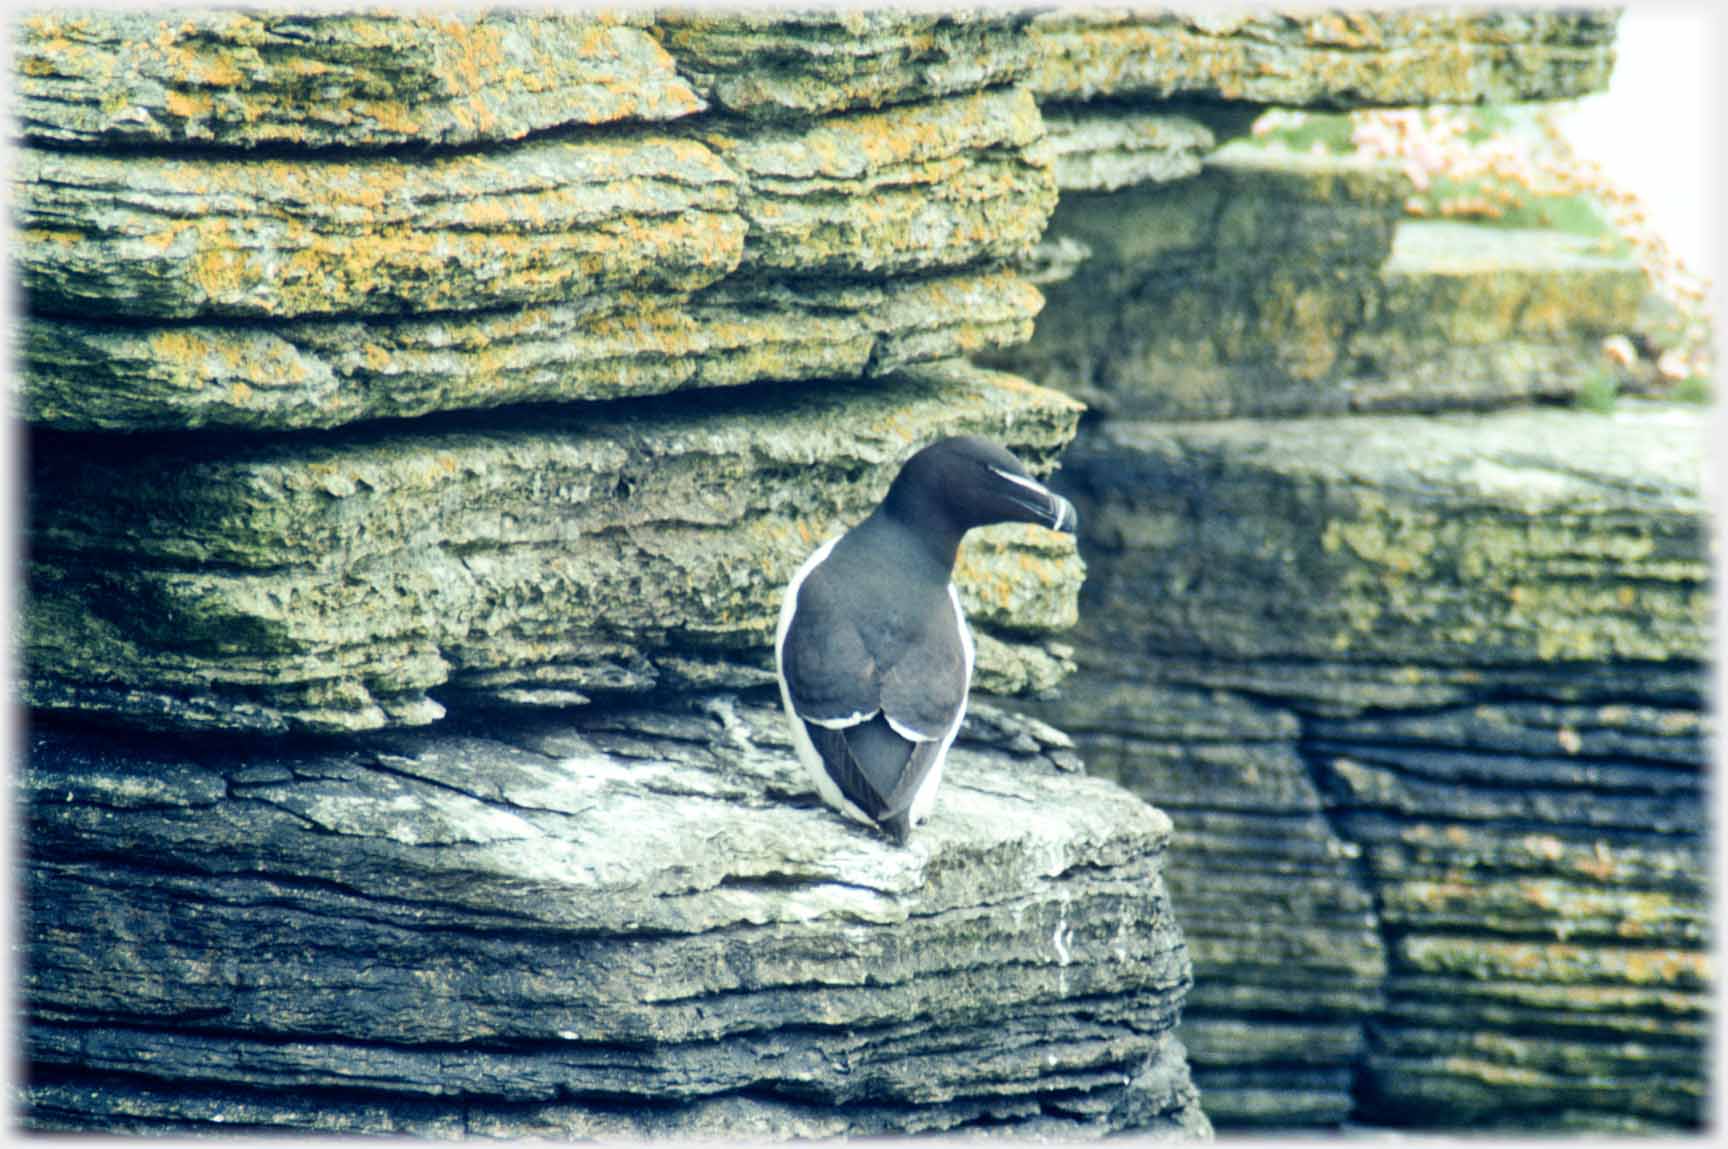 Razorbill square on to back with head turned.